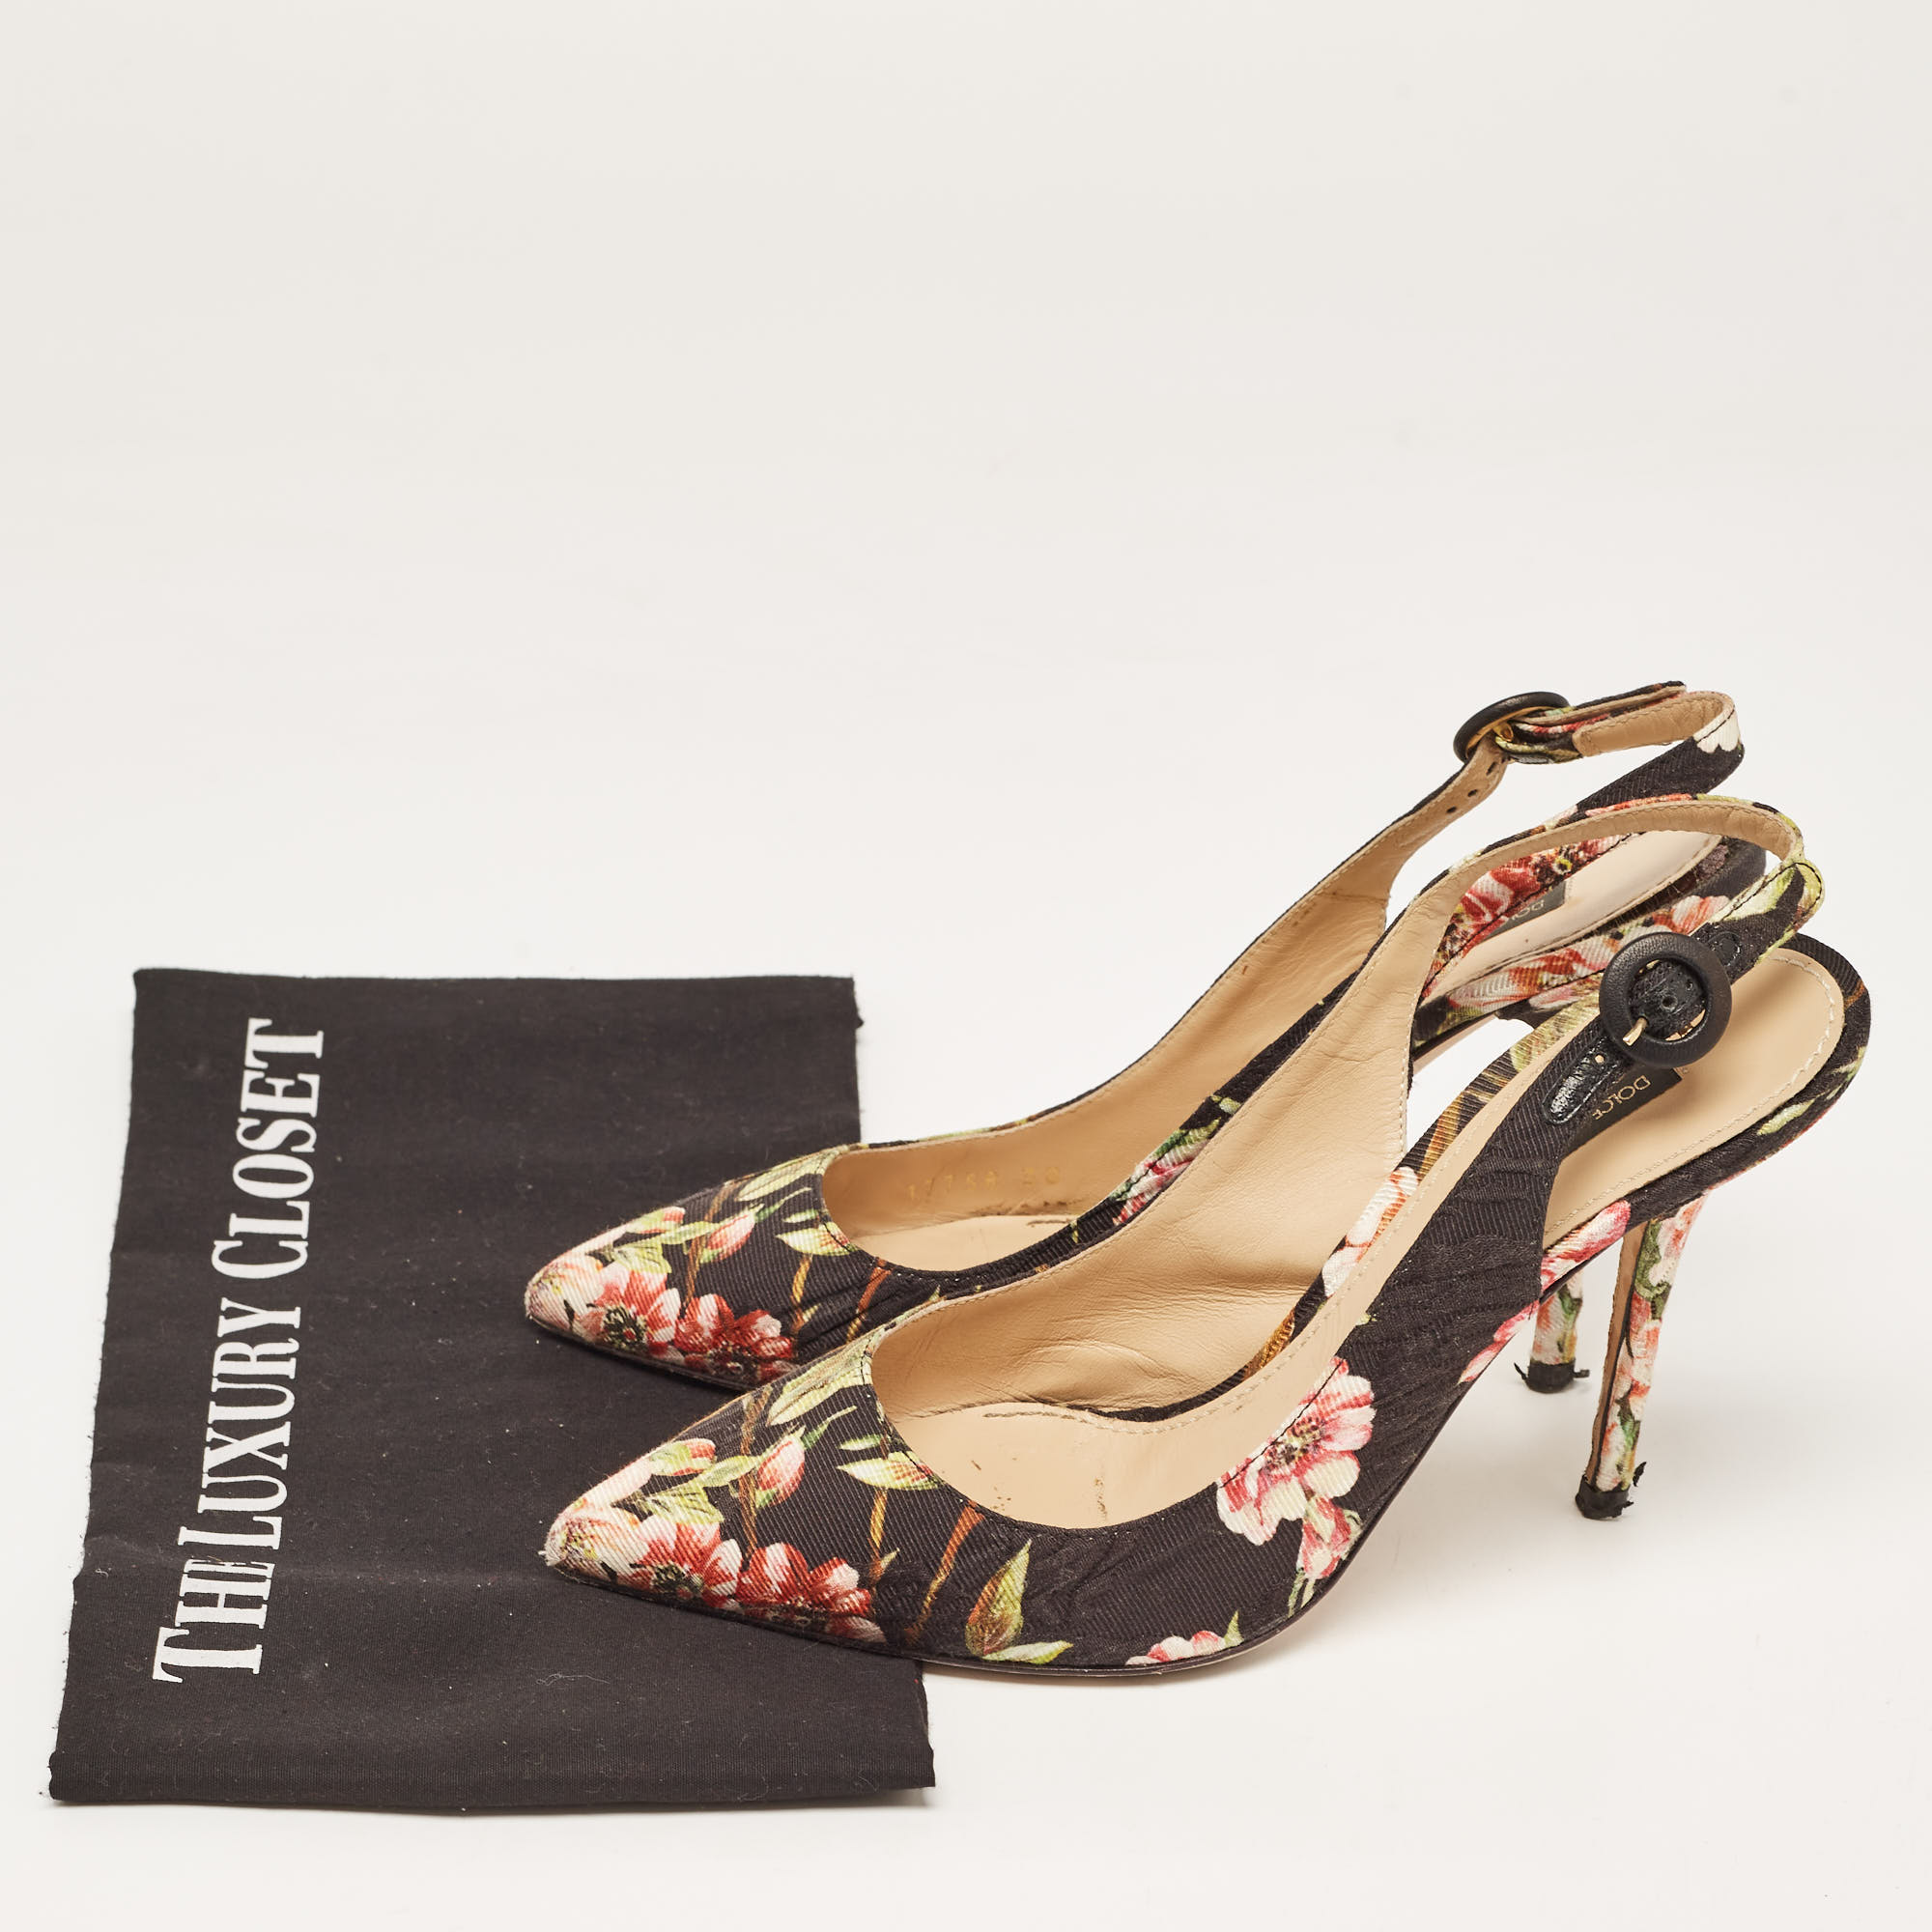 Dolce & Gabbana Multicolor Floral Print Brocade Slingback Pointed Toe Pumps Size 38